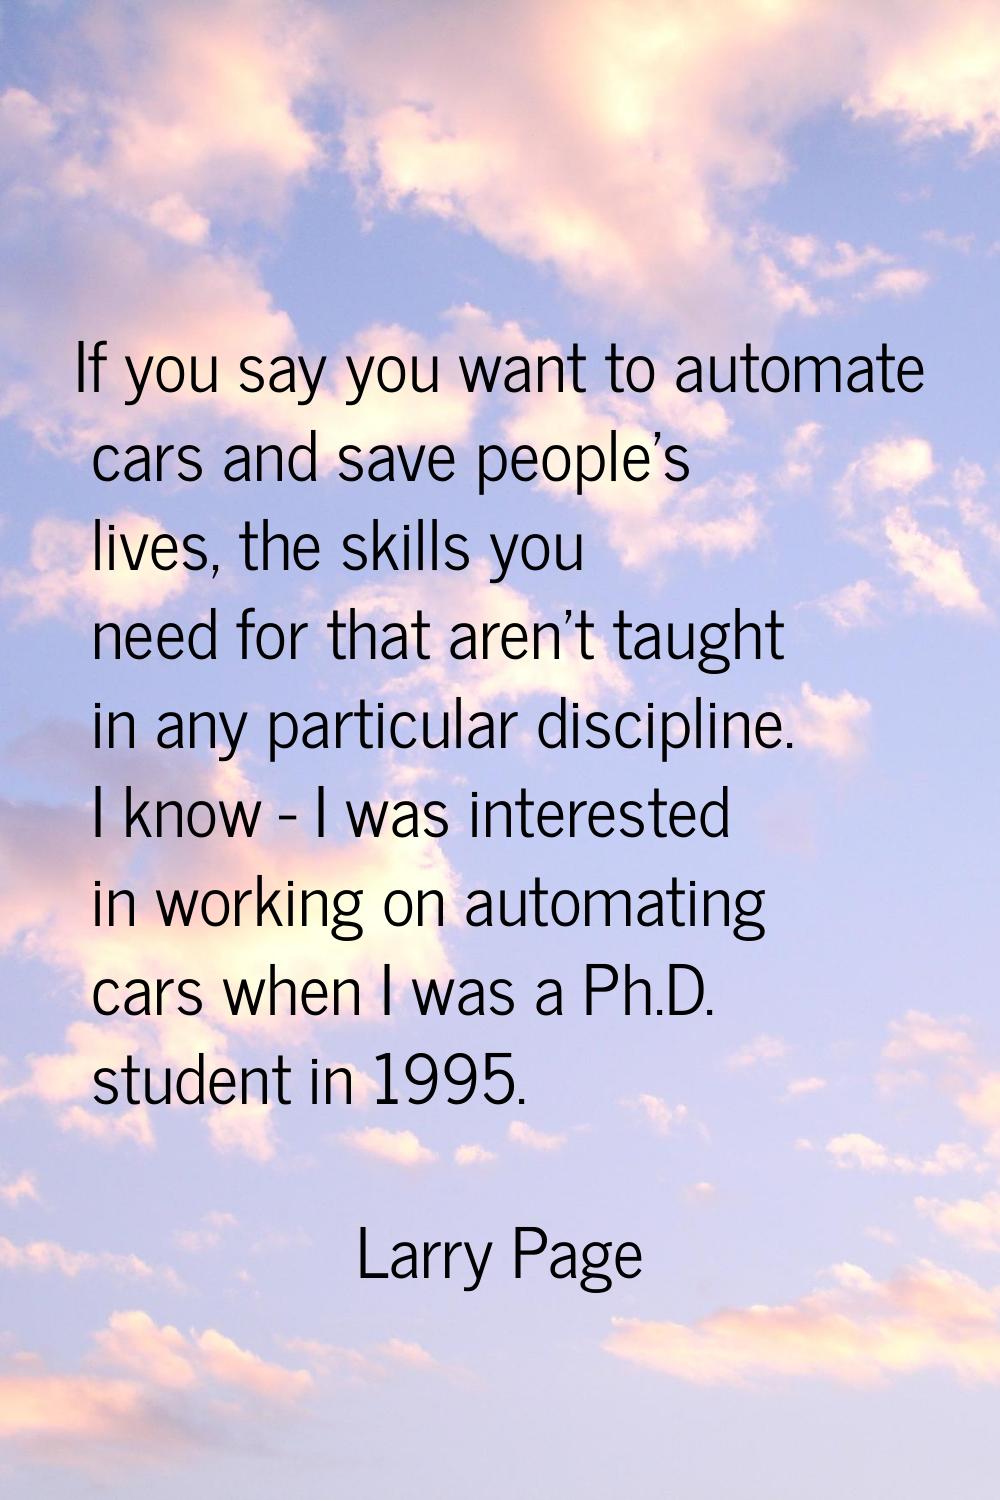 If you say you want to automate cars and save people's lives, the skills you need for that aren't t